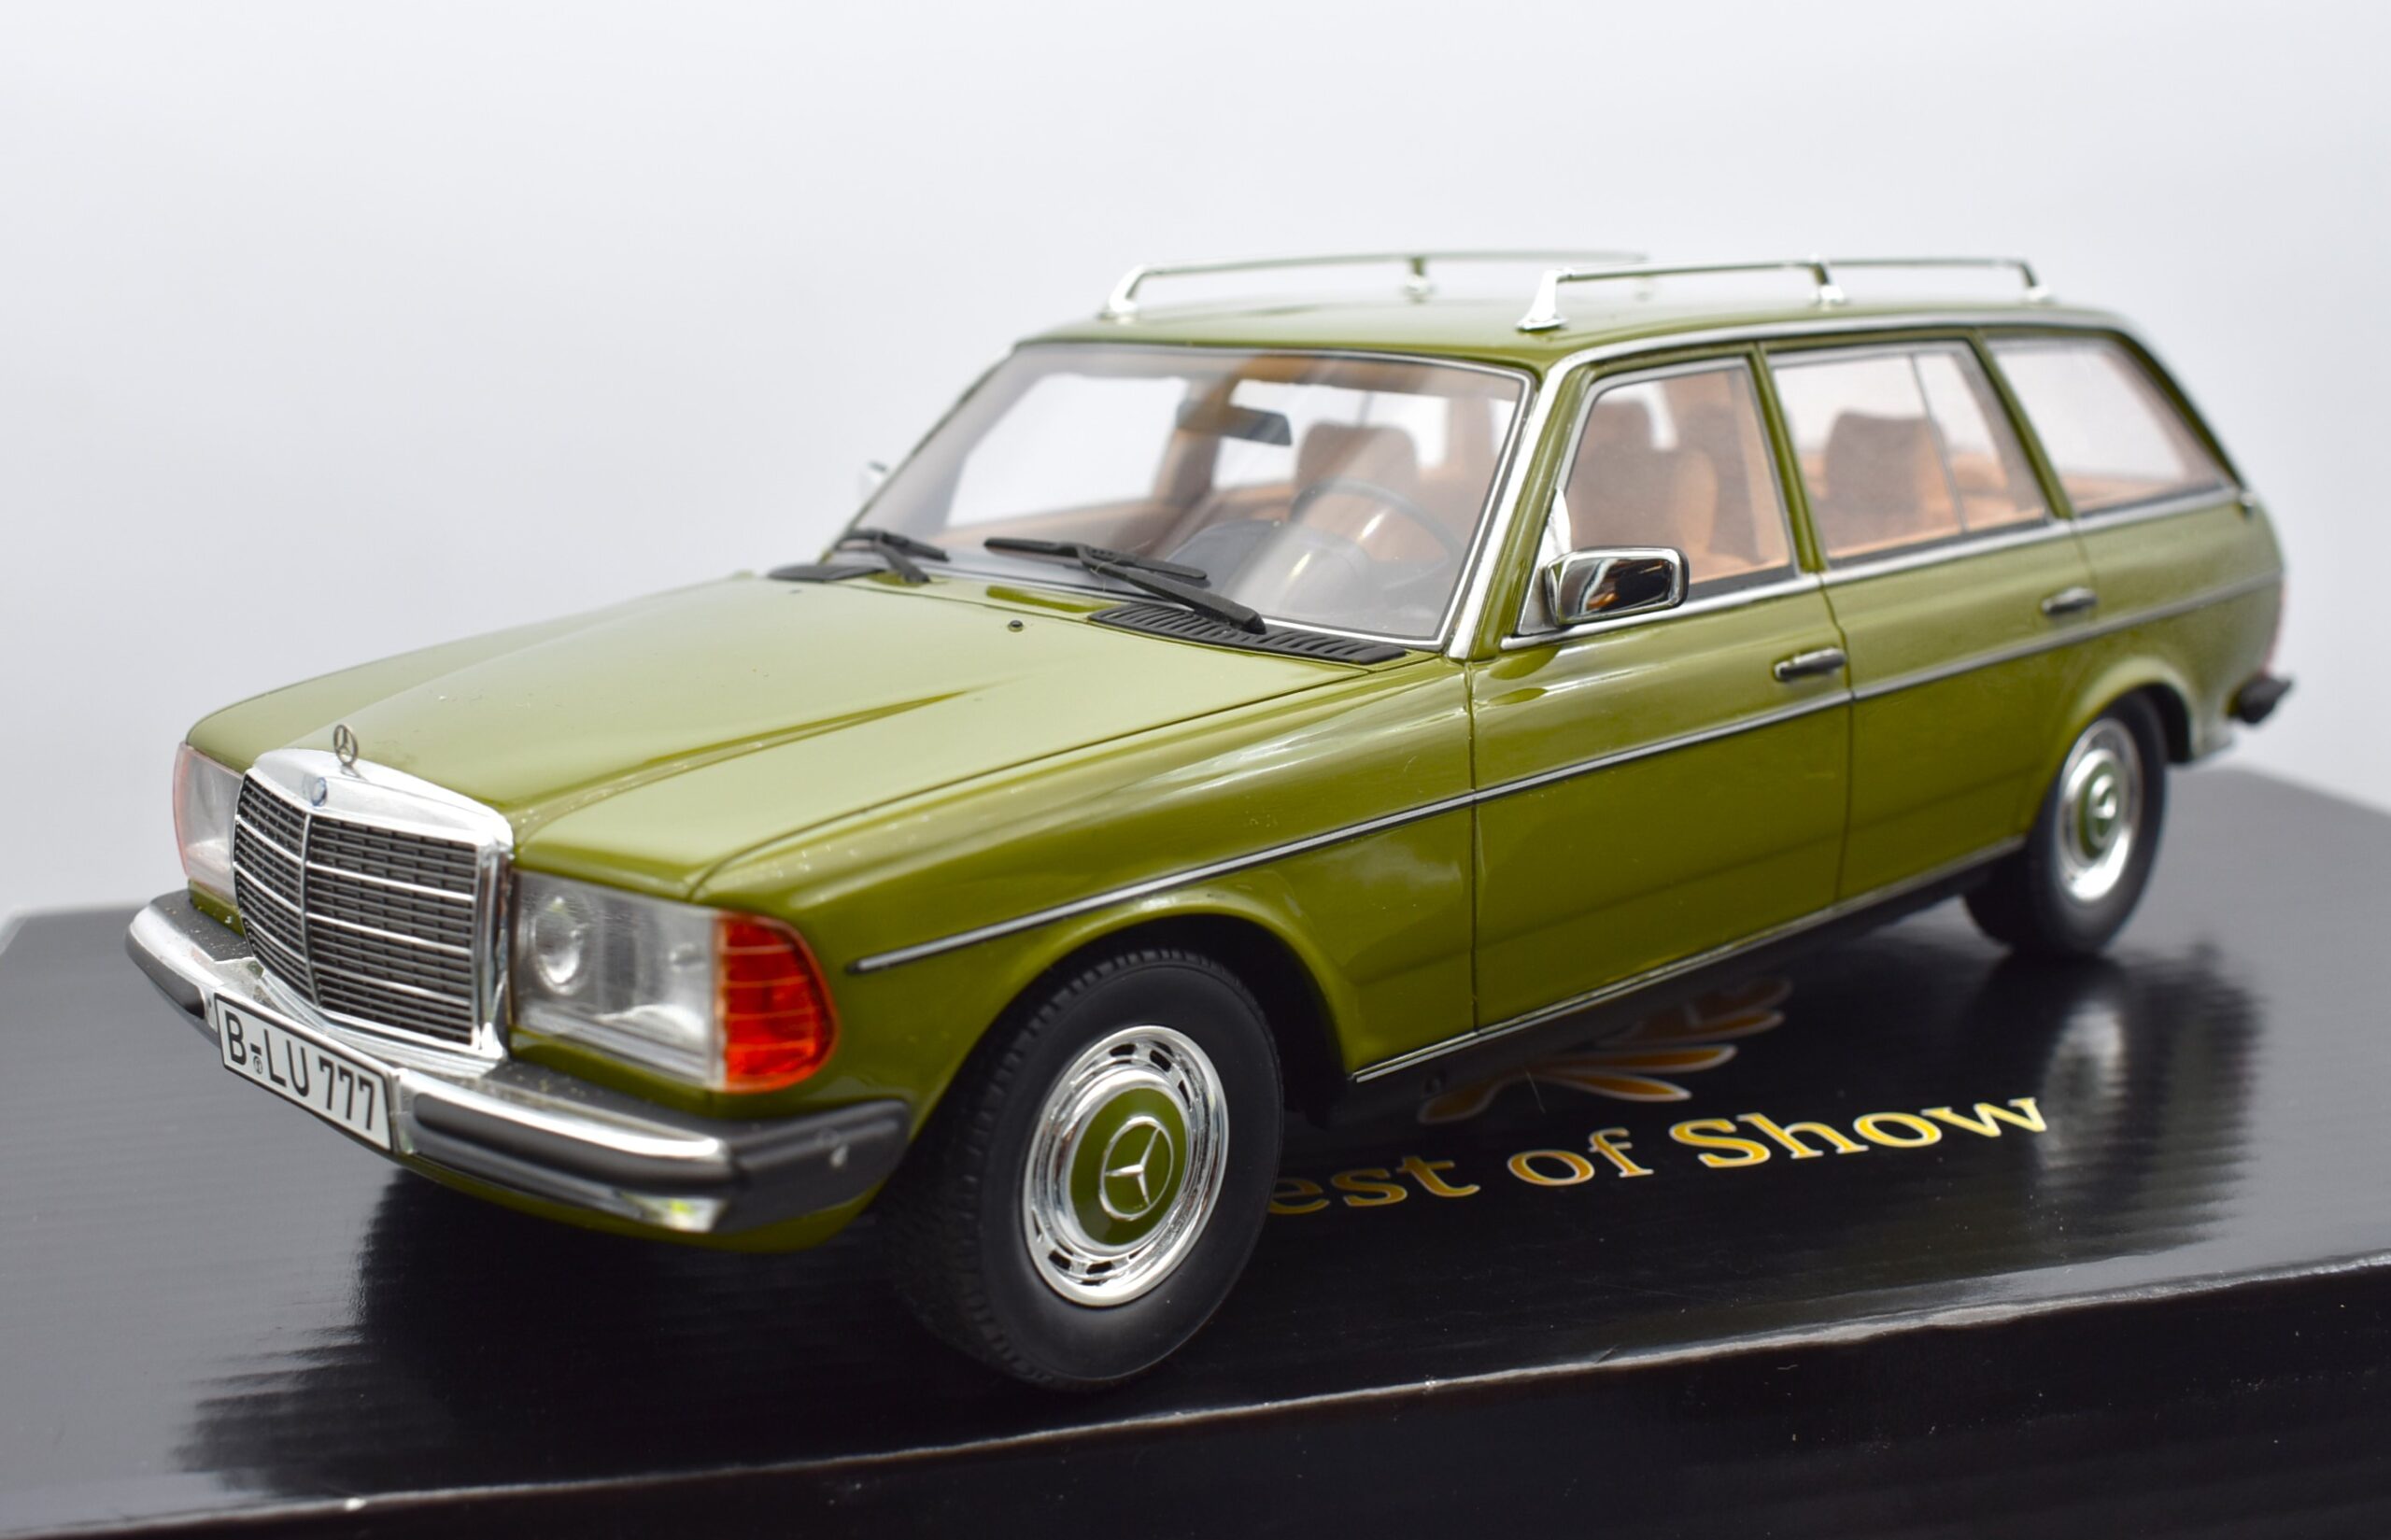 1:18 scale model car Mercedes 200T W123 BoS Models collection vehicles